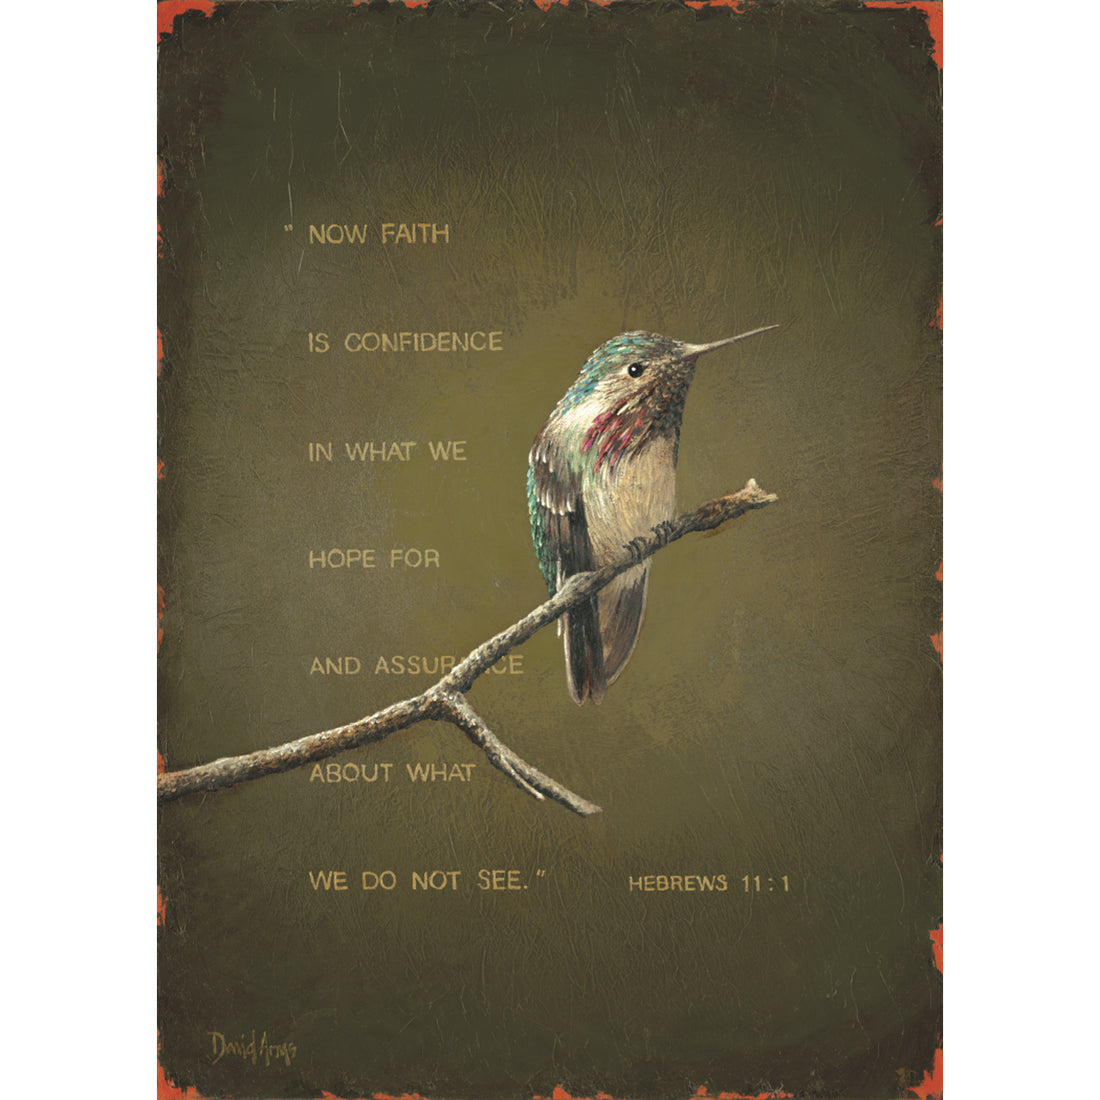 An illustration of a hummingbird resting on a twig in front of a dark neutral vignette background, with the Bible quote from &quot;Hebrews 11:1&quot; printed in yellow in the background.